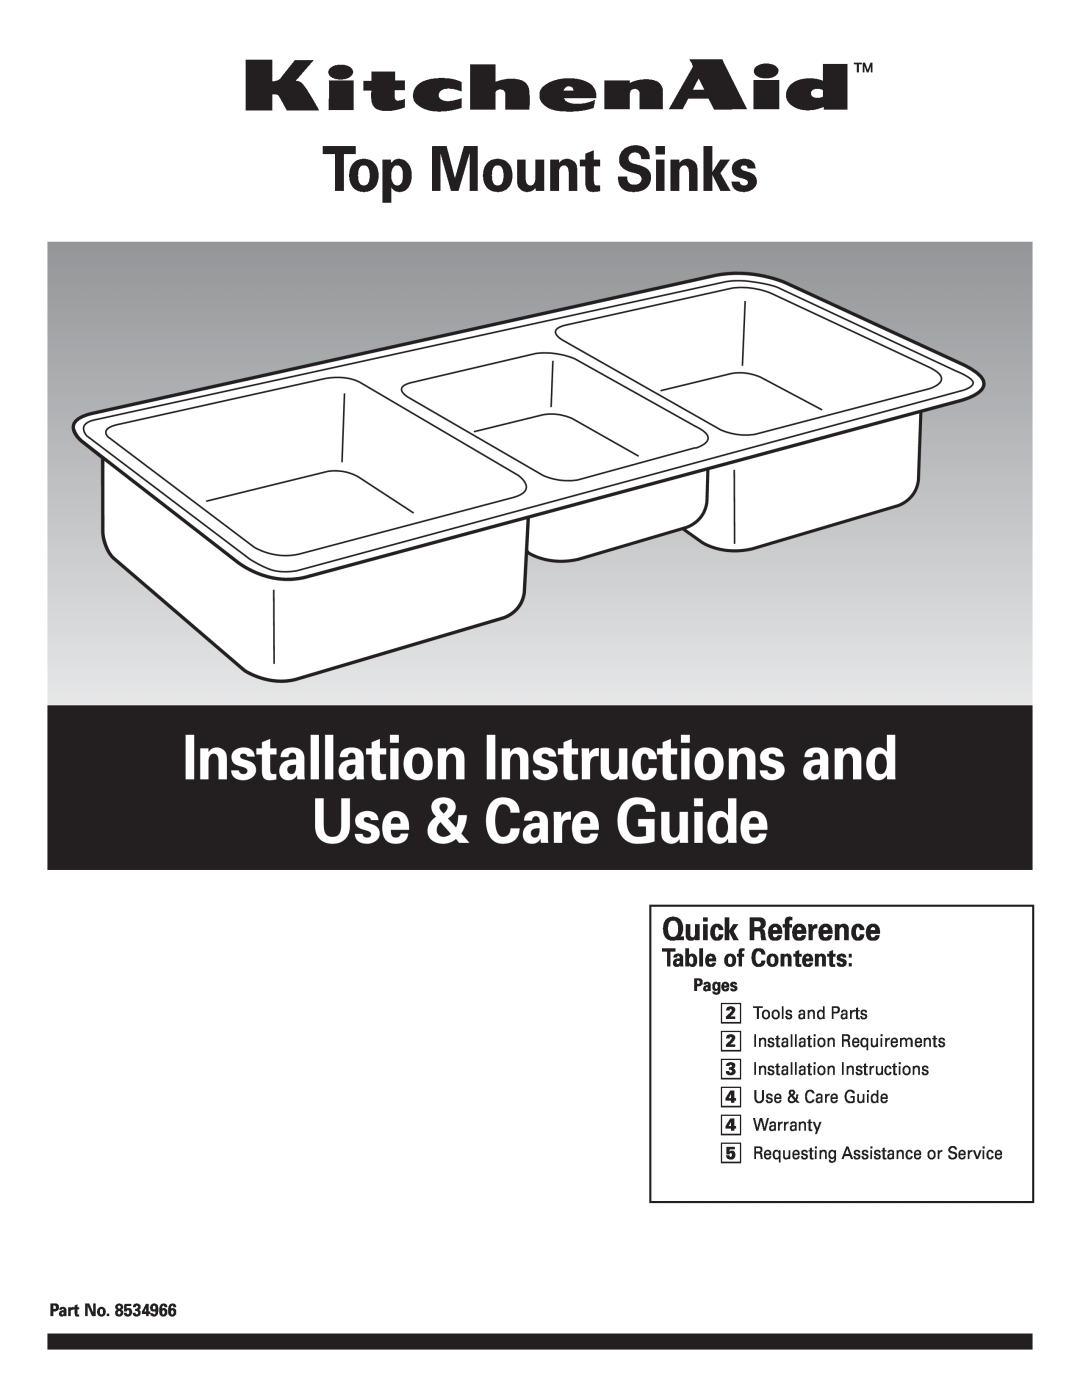 KitchenAid Sinks 8534966 installation instructions Table of Contents, Top Mount Sinks, Quick Reference 